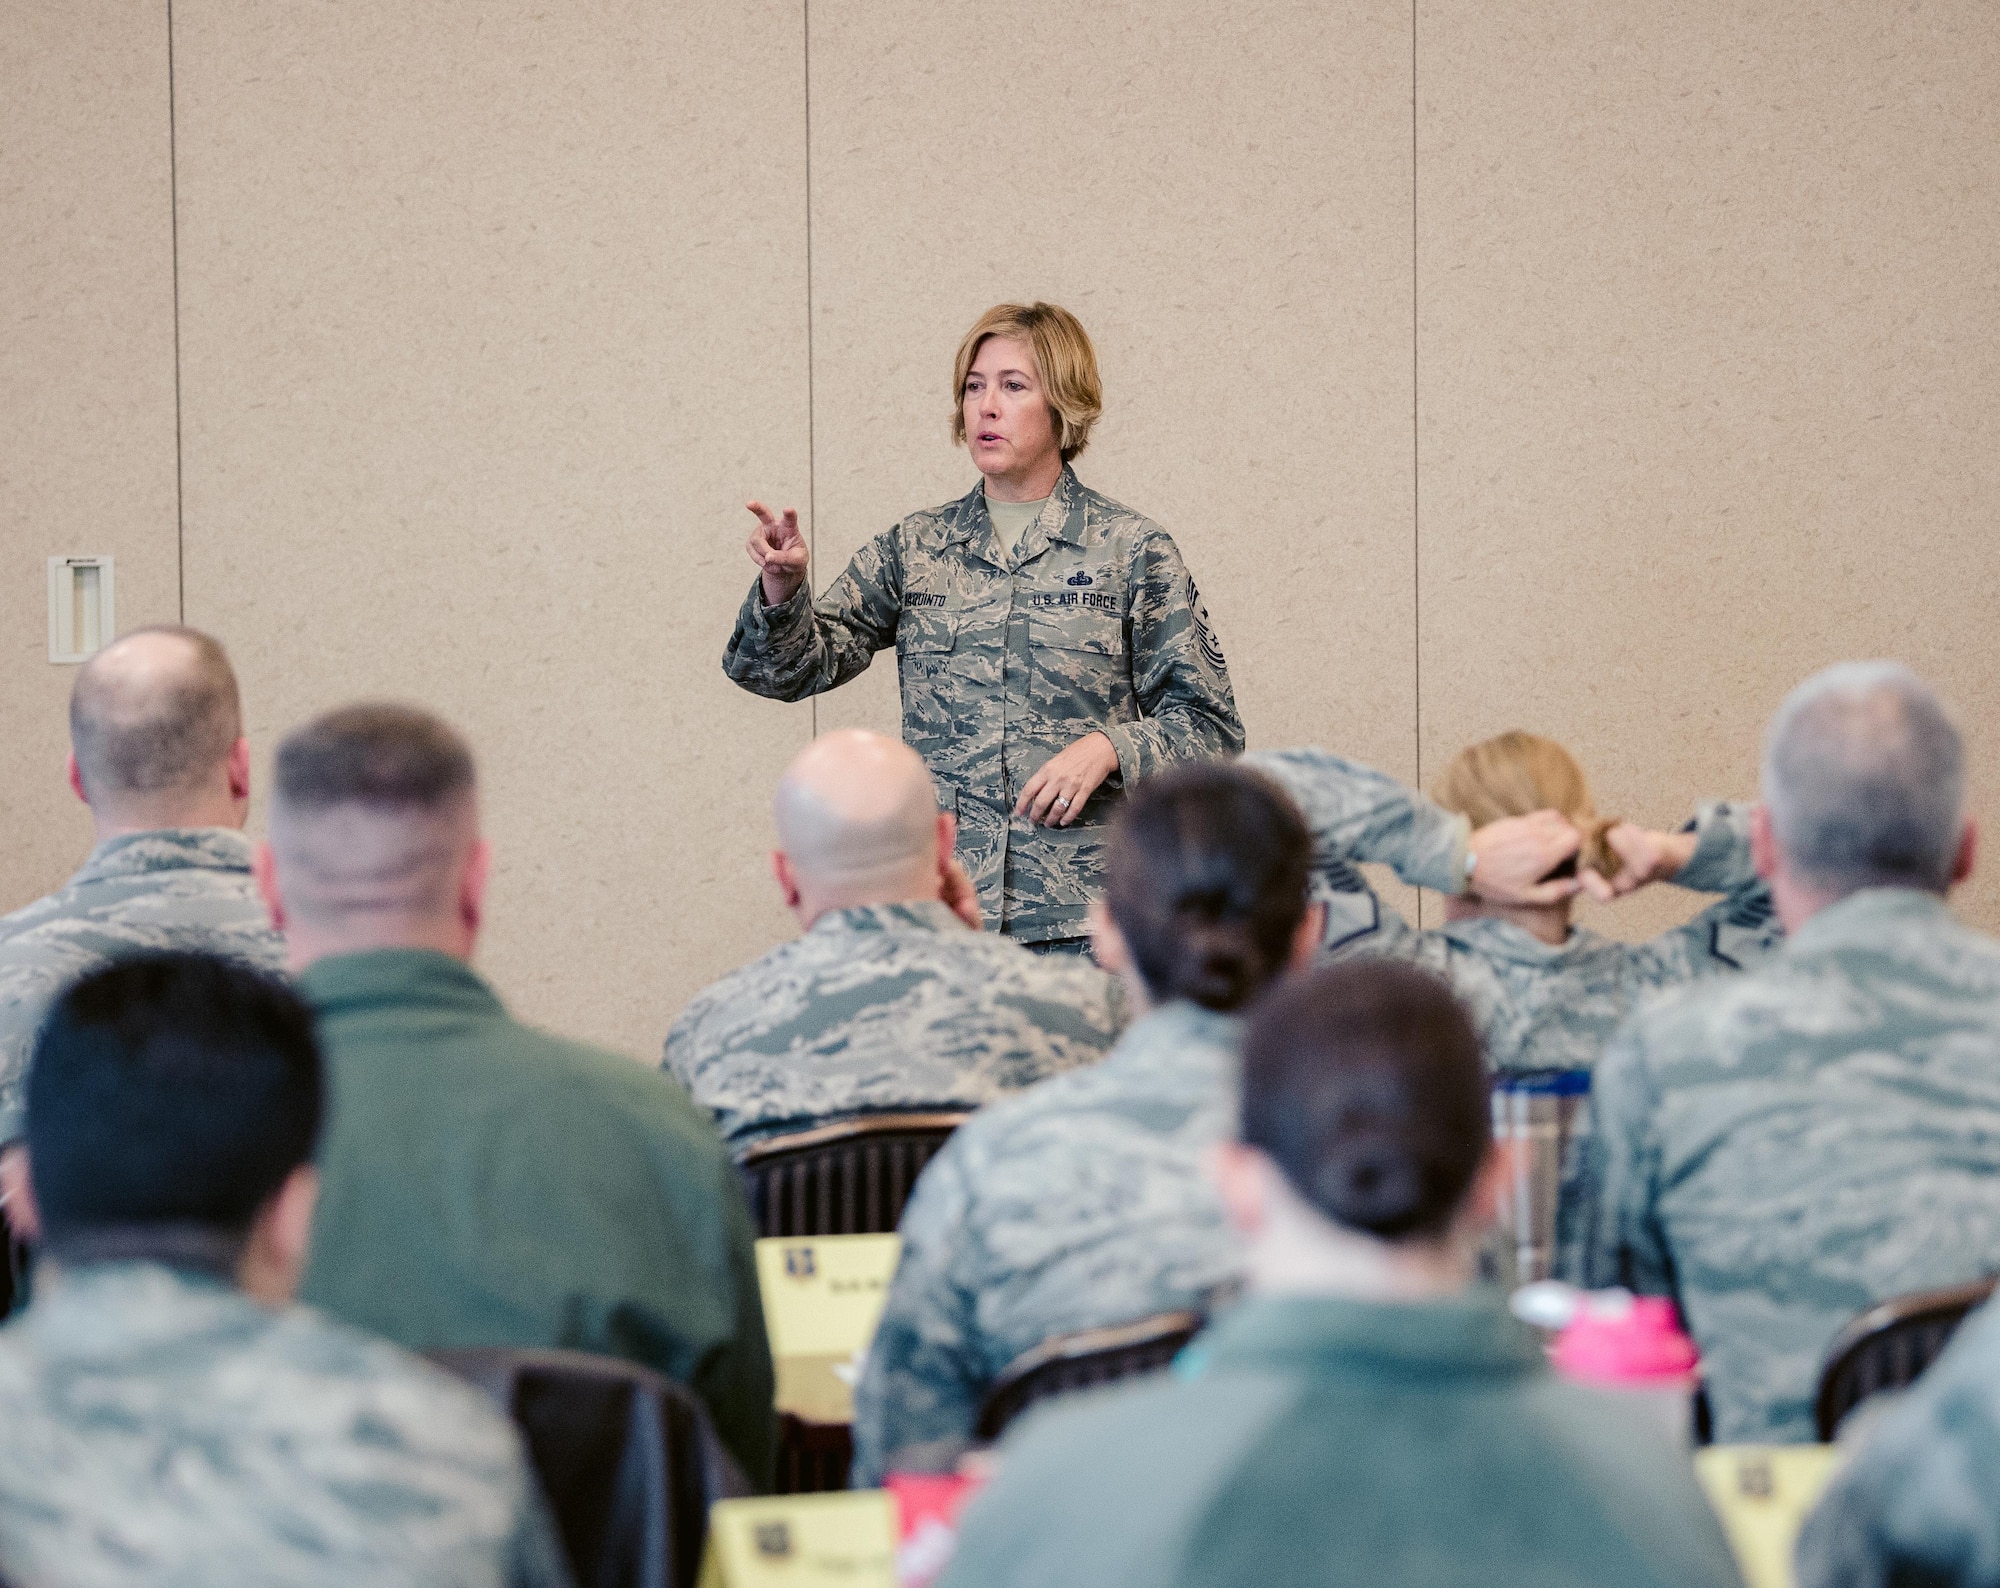 Command Chief Master Sgt. Amy Giaquinto, the senior enlisted advisor to the Adjutant General of New York, speaks to members of the 107th Attack Wing in Niagara Falls, N.Y. on Oct. 17, 2017. Giaqunito is the first woman and the first Air National Guard member to hold that role in New York. (U.S. Air National Guard photo by Staff Sgt. Ryan Campbell)